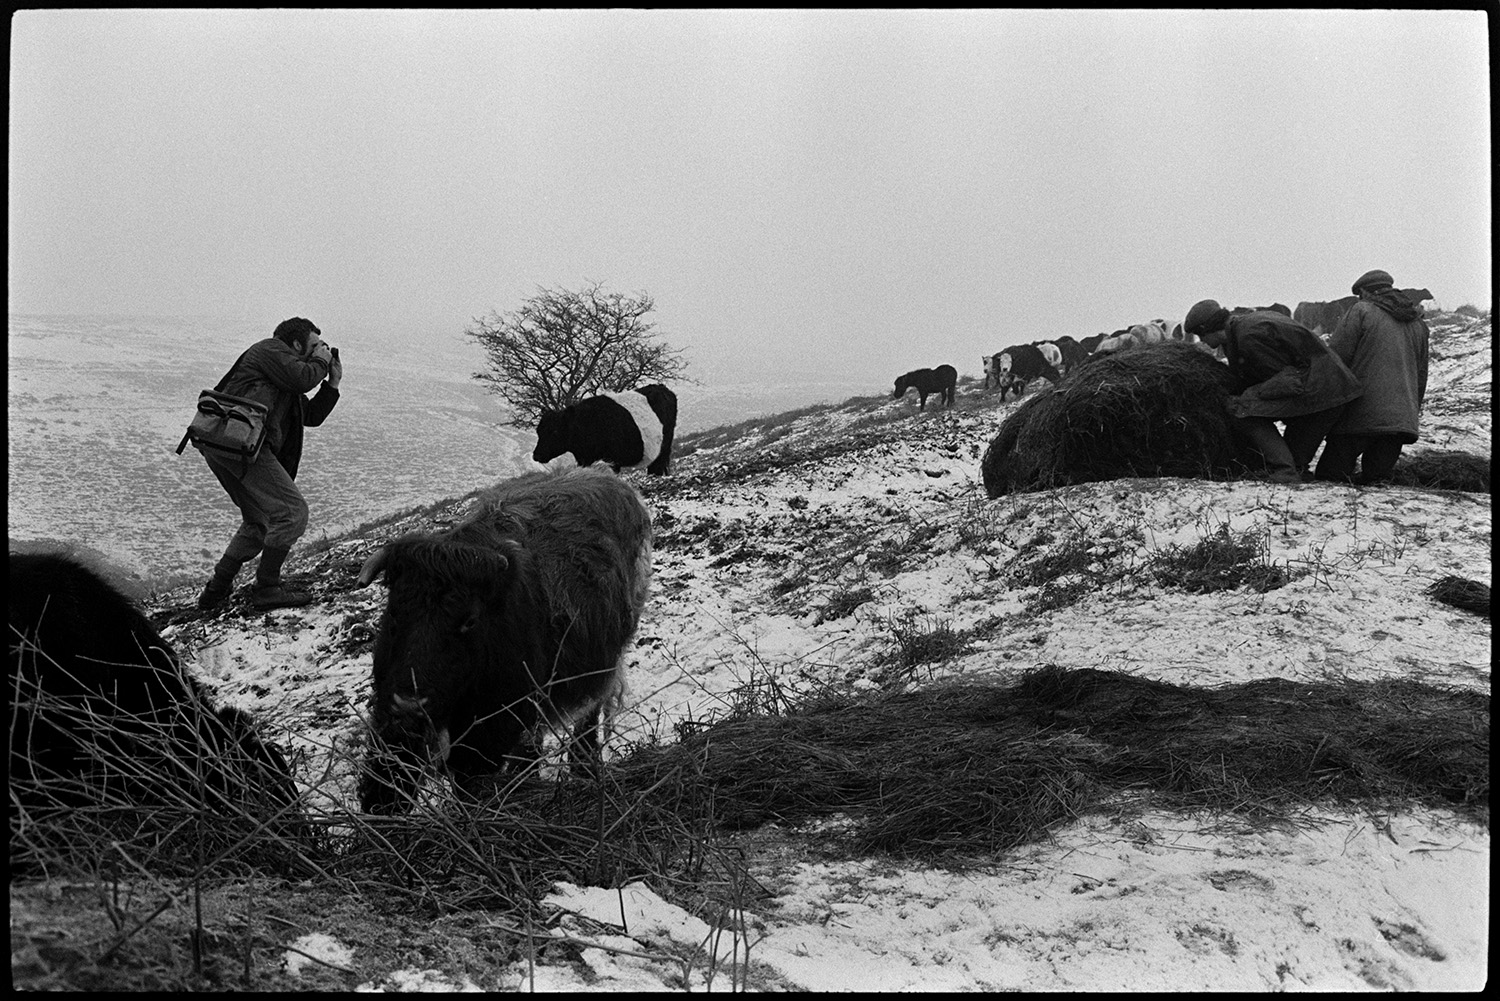 Snow. Farmers feeding cattle on moor, photographer taking pictures.
[Chris Chapman photographing two farmers spreading hay on a steep snowy hillside to feed cattle near Chagford, Dartmoor.]